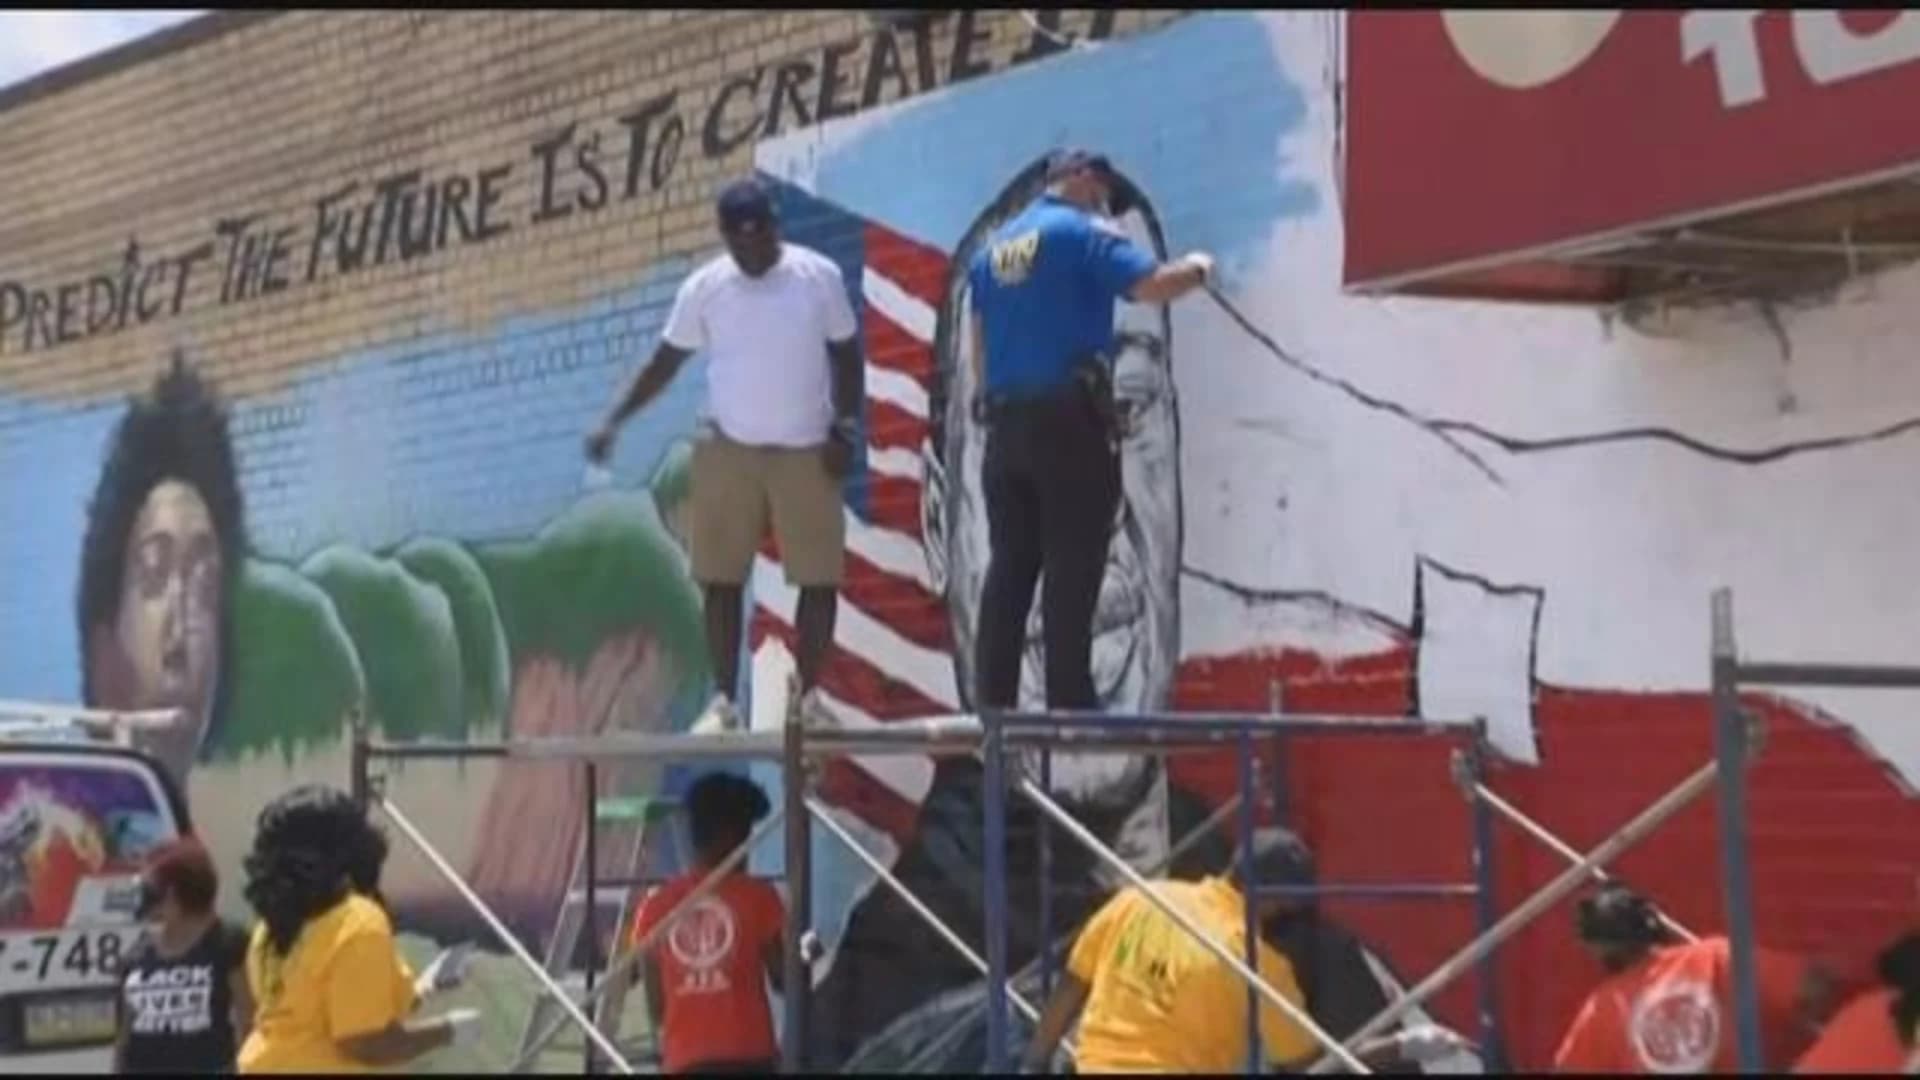 Local artist works with police on George Floyd mural in Canarsie